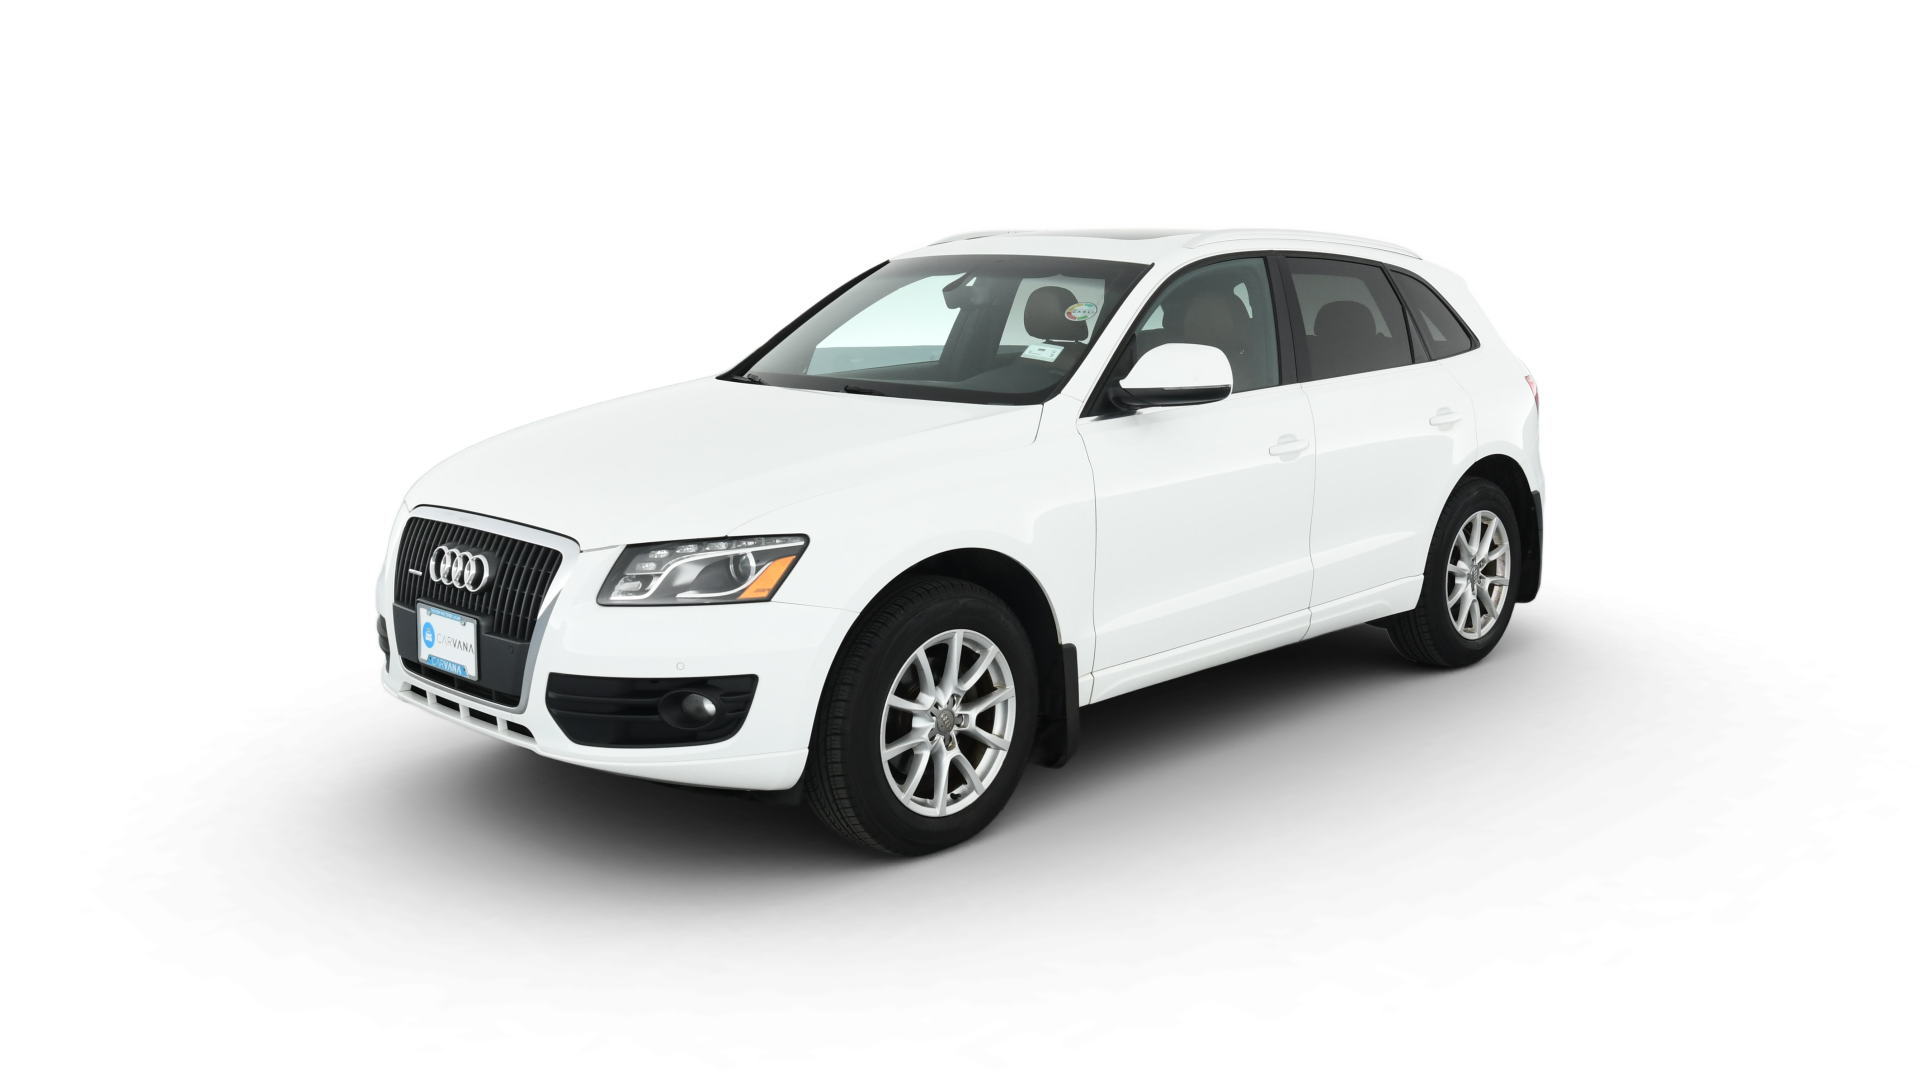 Used 2012 Audi Q5 For Sale Online | Carvana